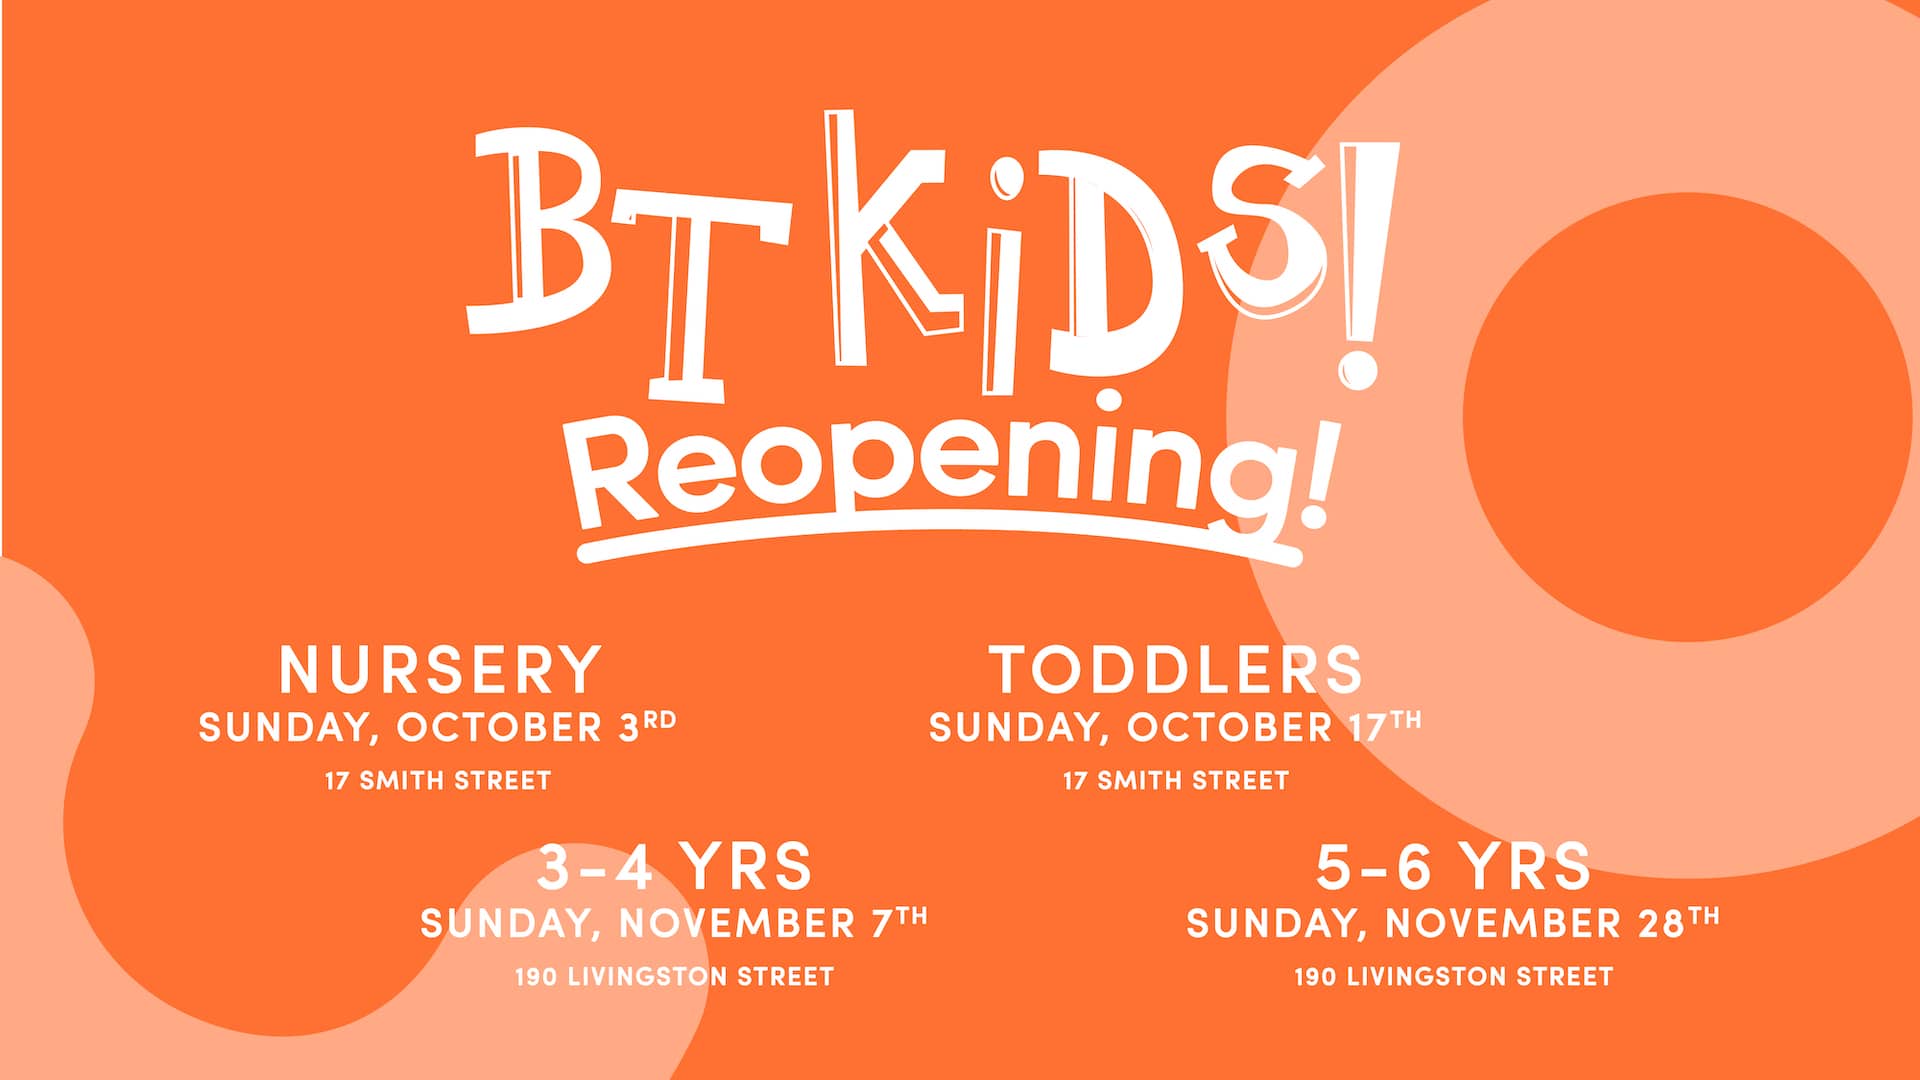 The Brooklyn Tabernacle BT Kids Reopening Banner